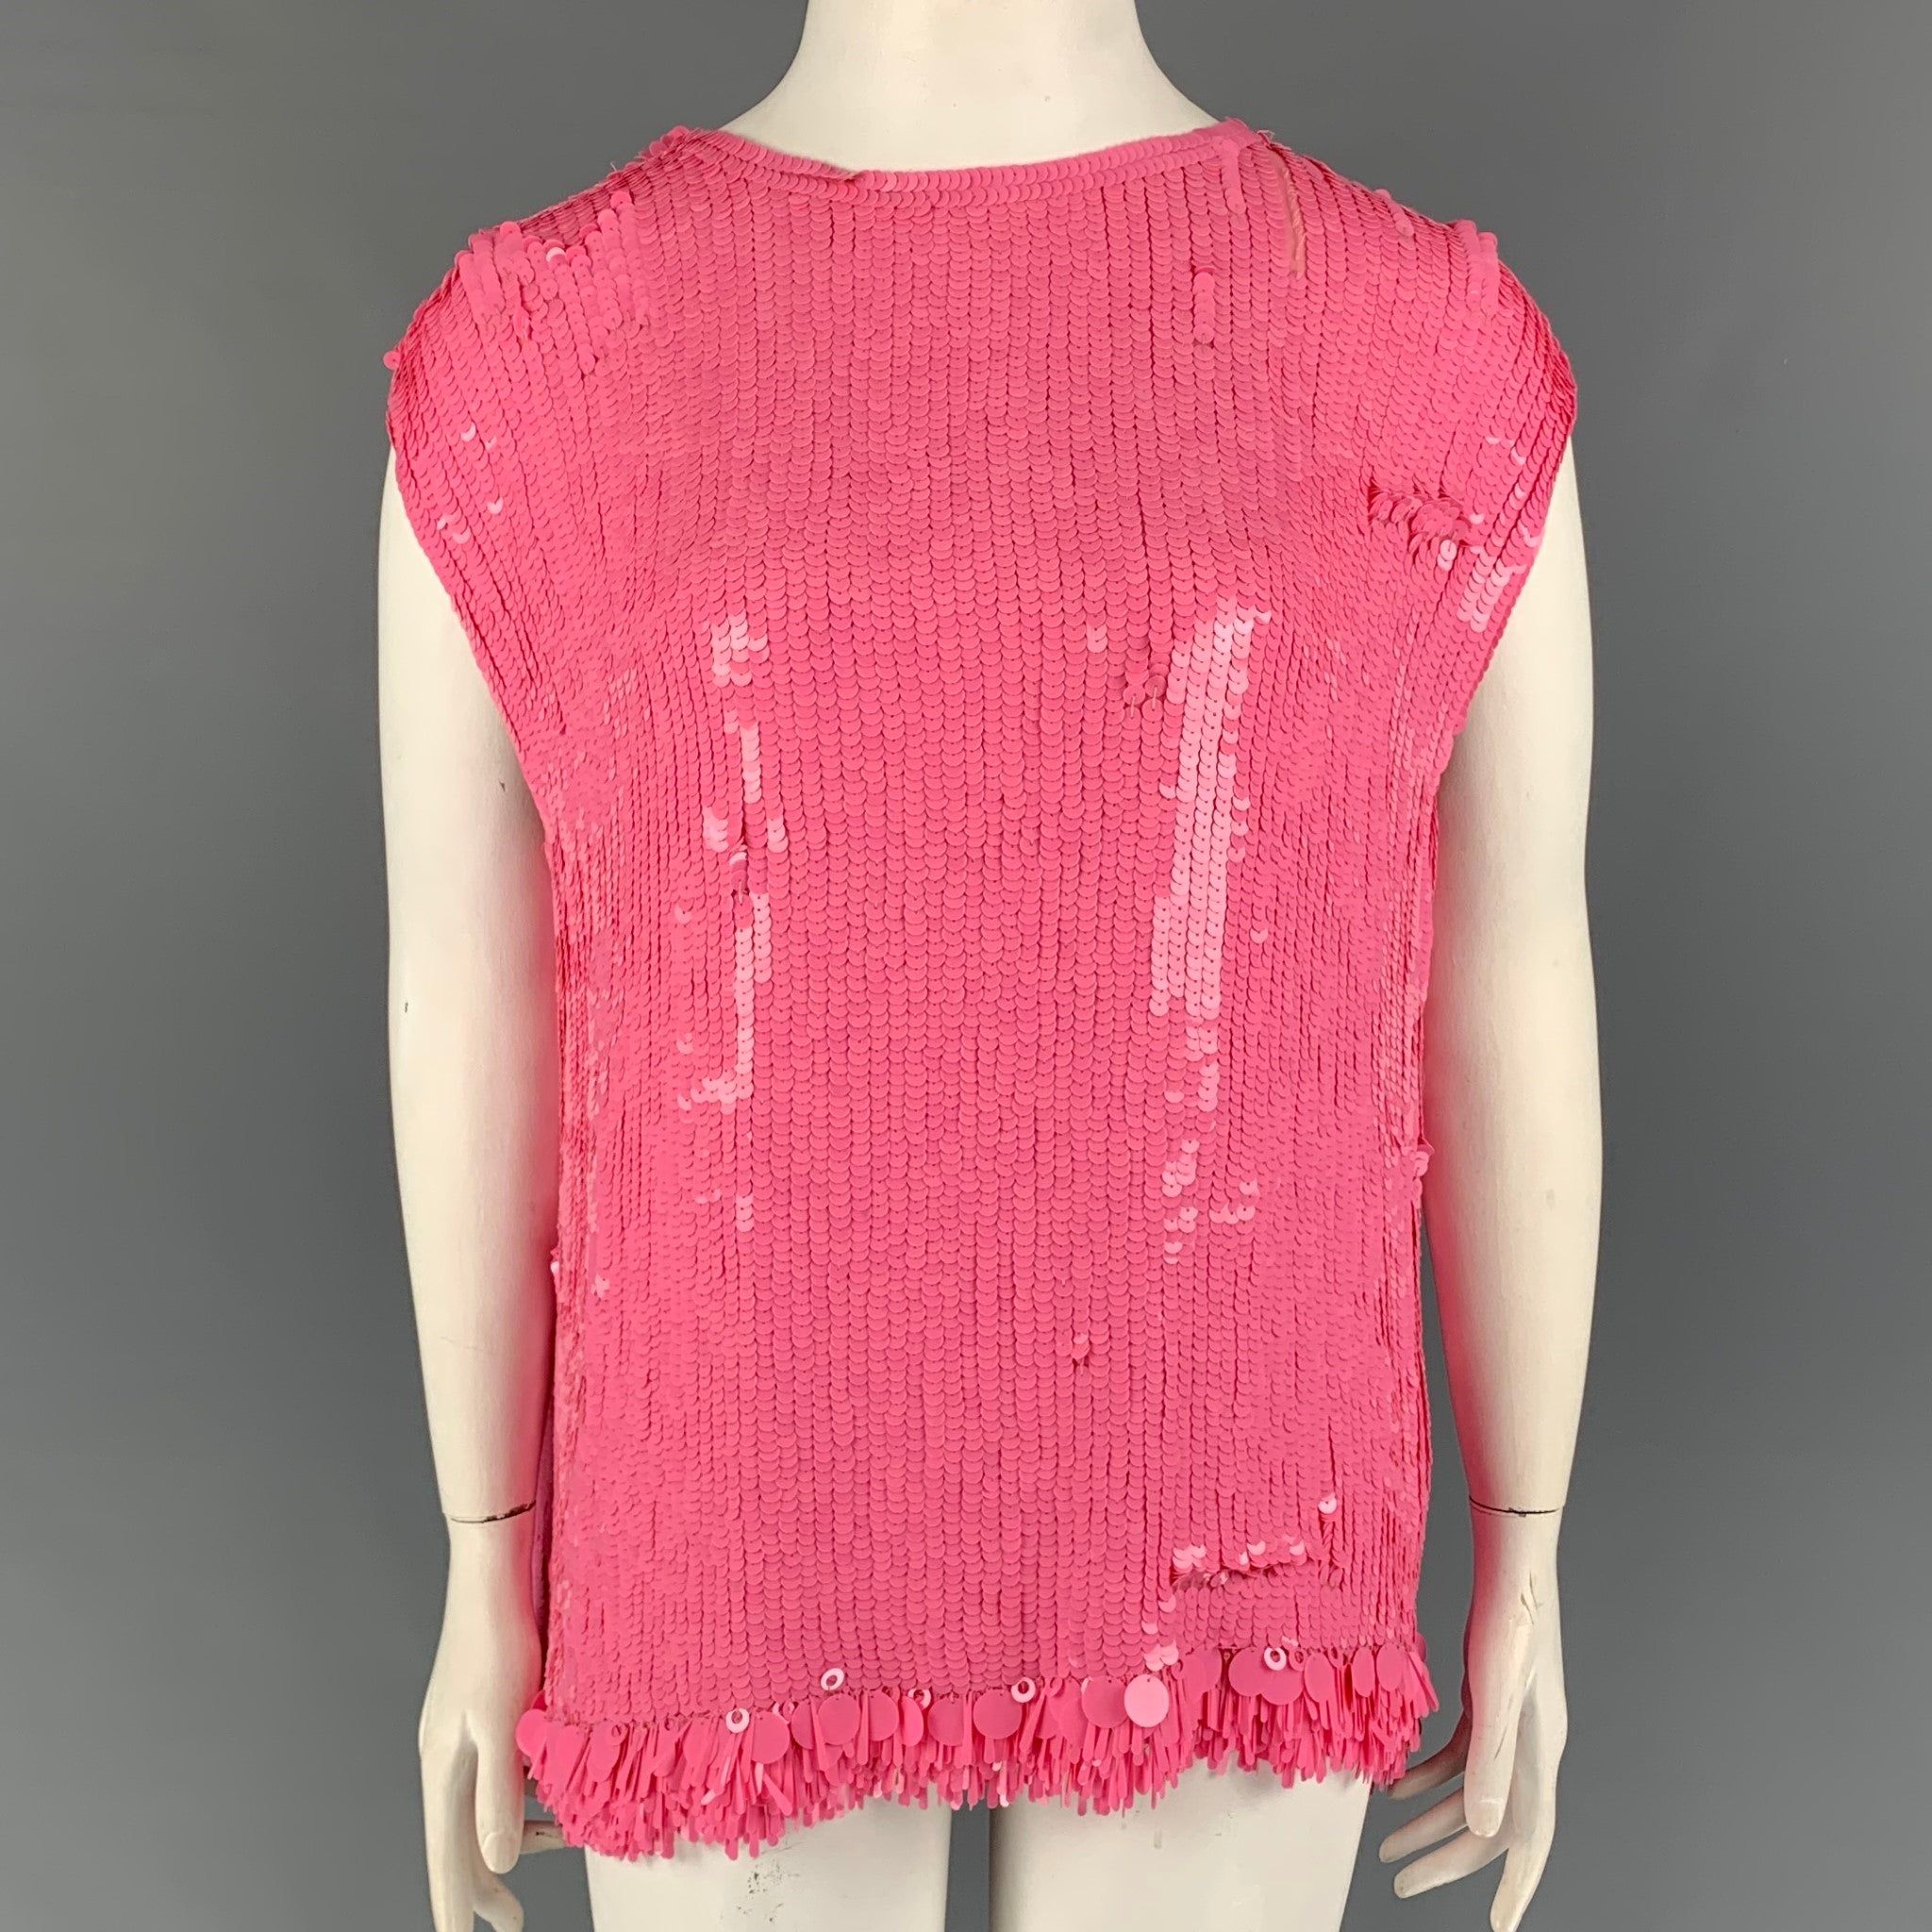 Dries Van Noten FW 21 Pink Viscose Sequined Sleeveless Dress Top Size L / US 10 / IT 46 - 1 Preview